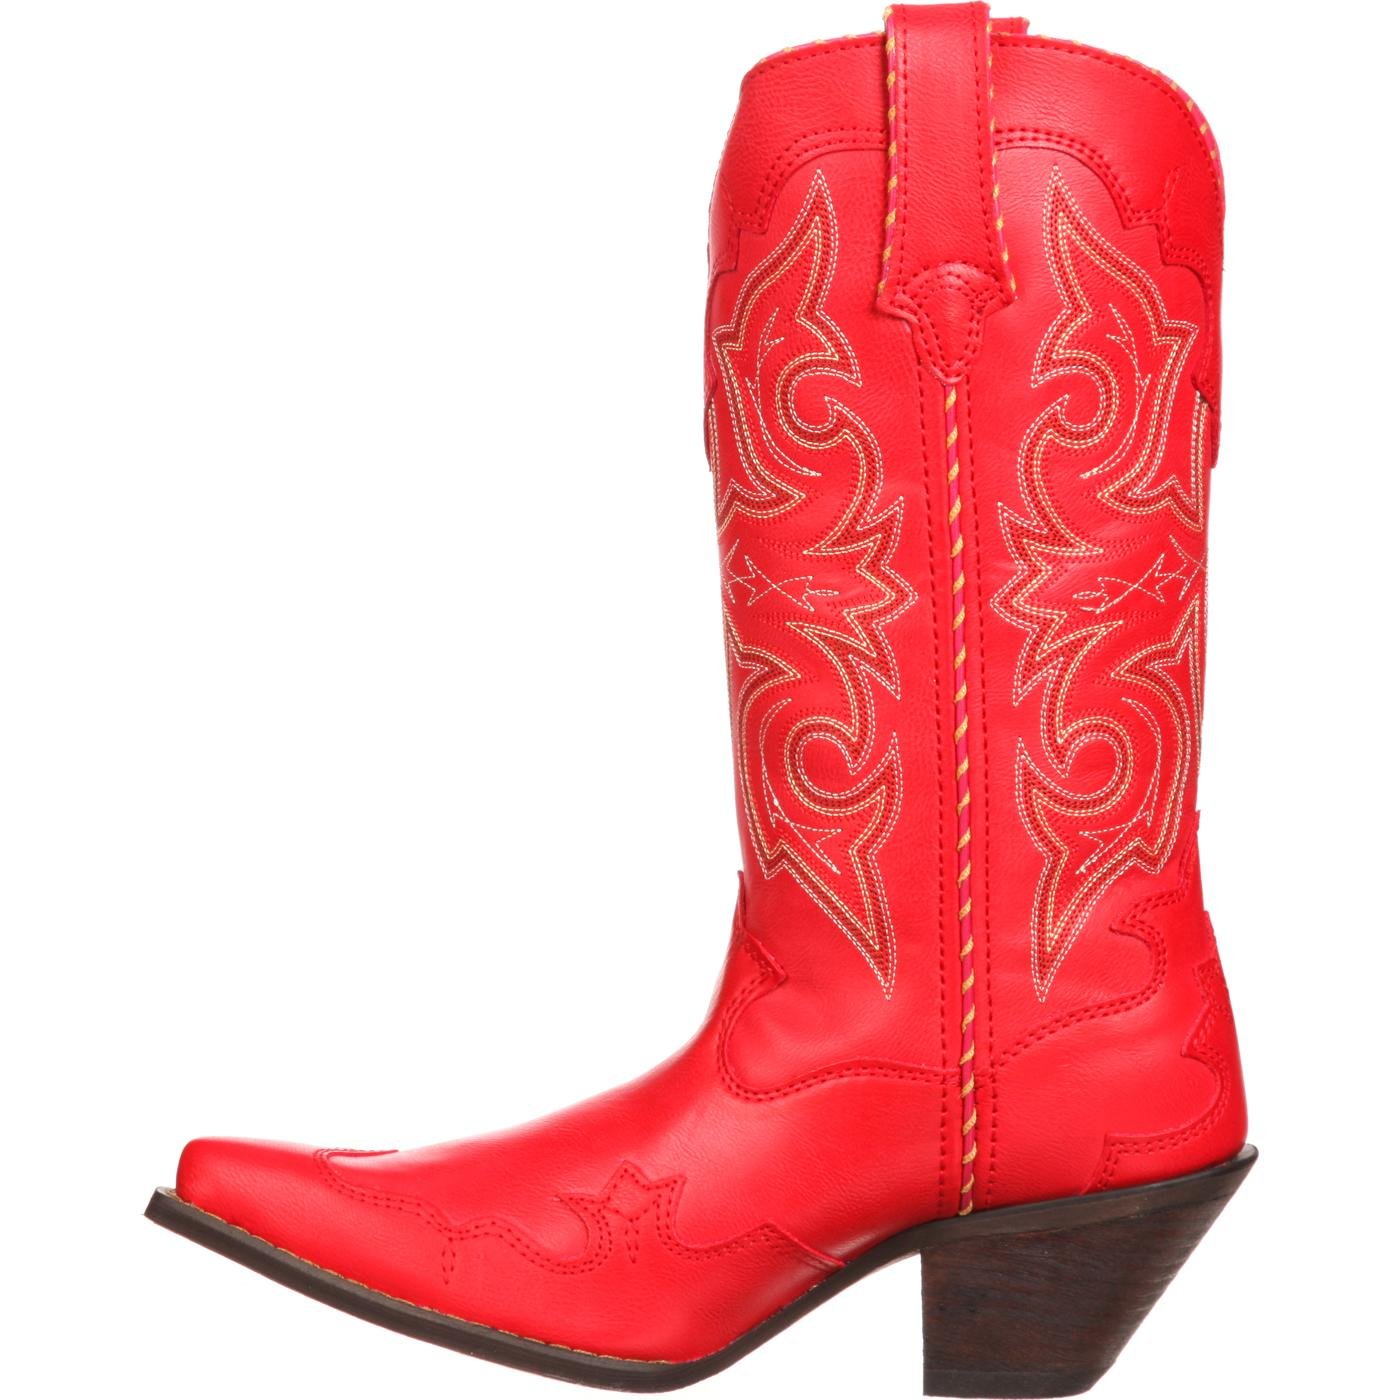 Women's 12-Inch Red Western Boots, Crush by Durango: RD3485